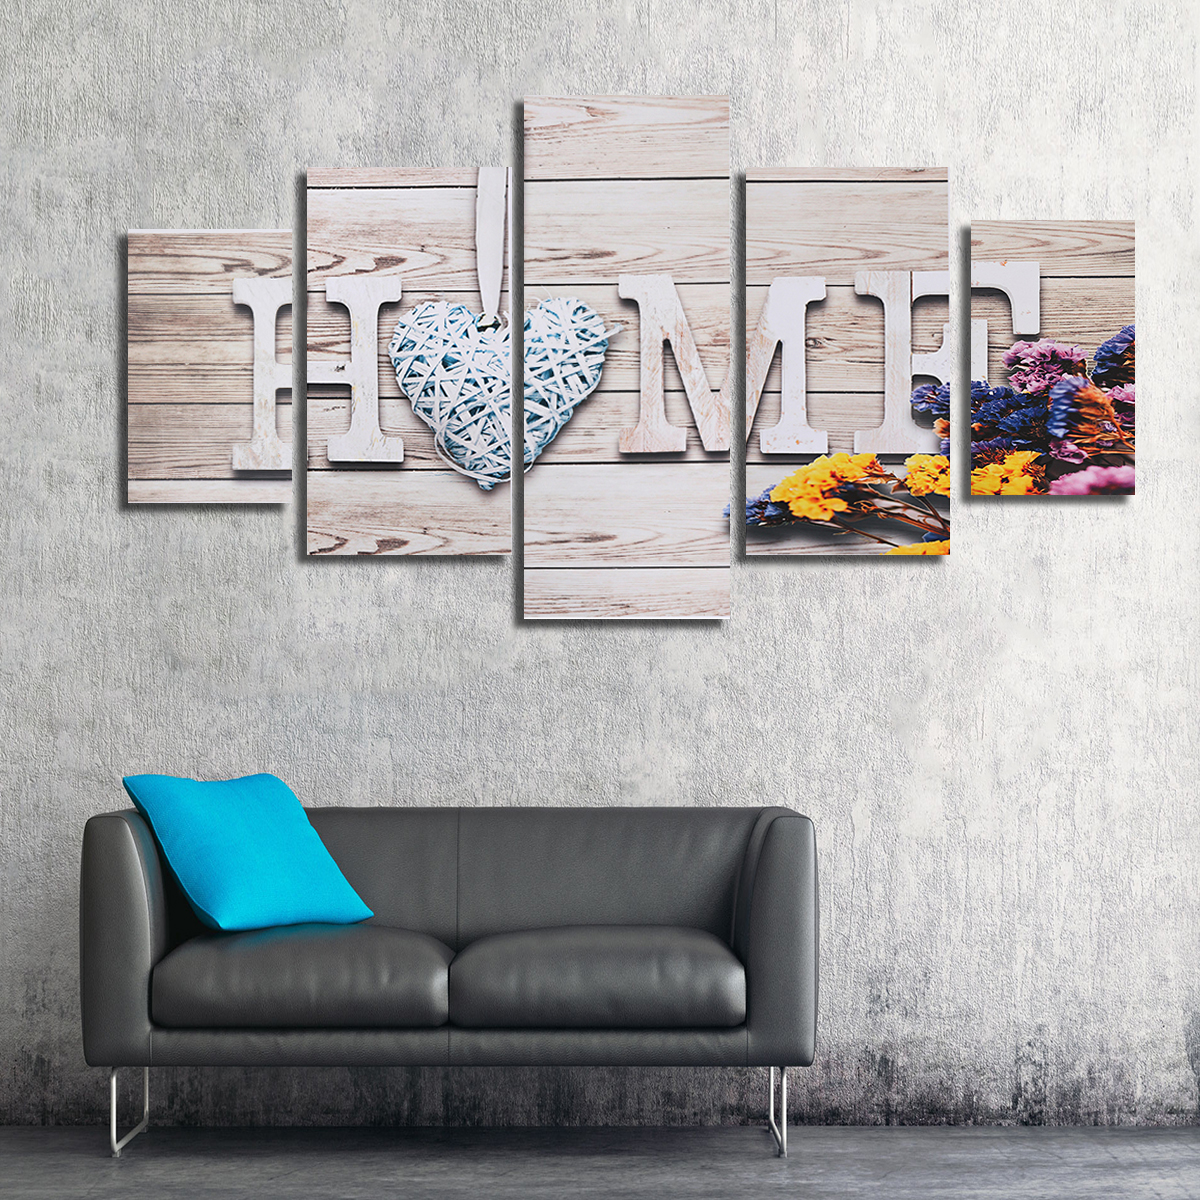 5Pcs-Canvas-Paintings-Love-HOME-Wall-Decorative-Print-Art-Pictures-Unframed-Wall-Hanging-Home-Office-1785063-8